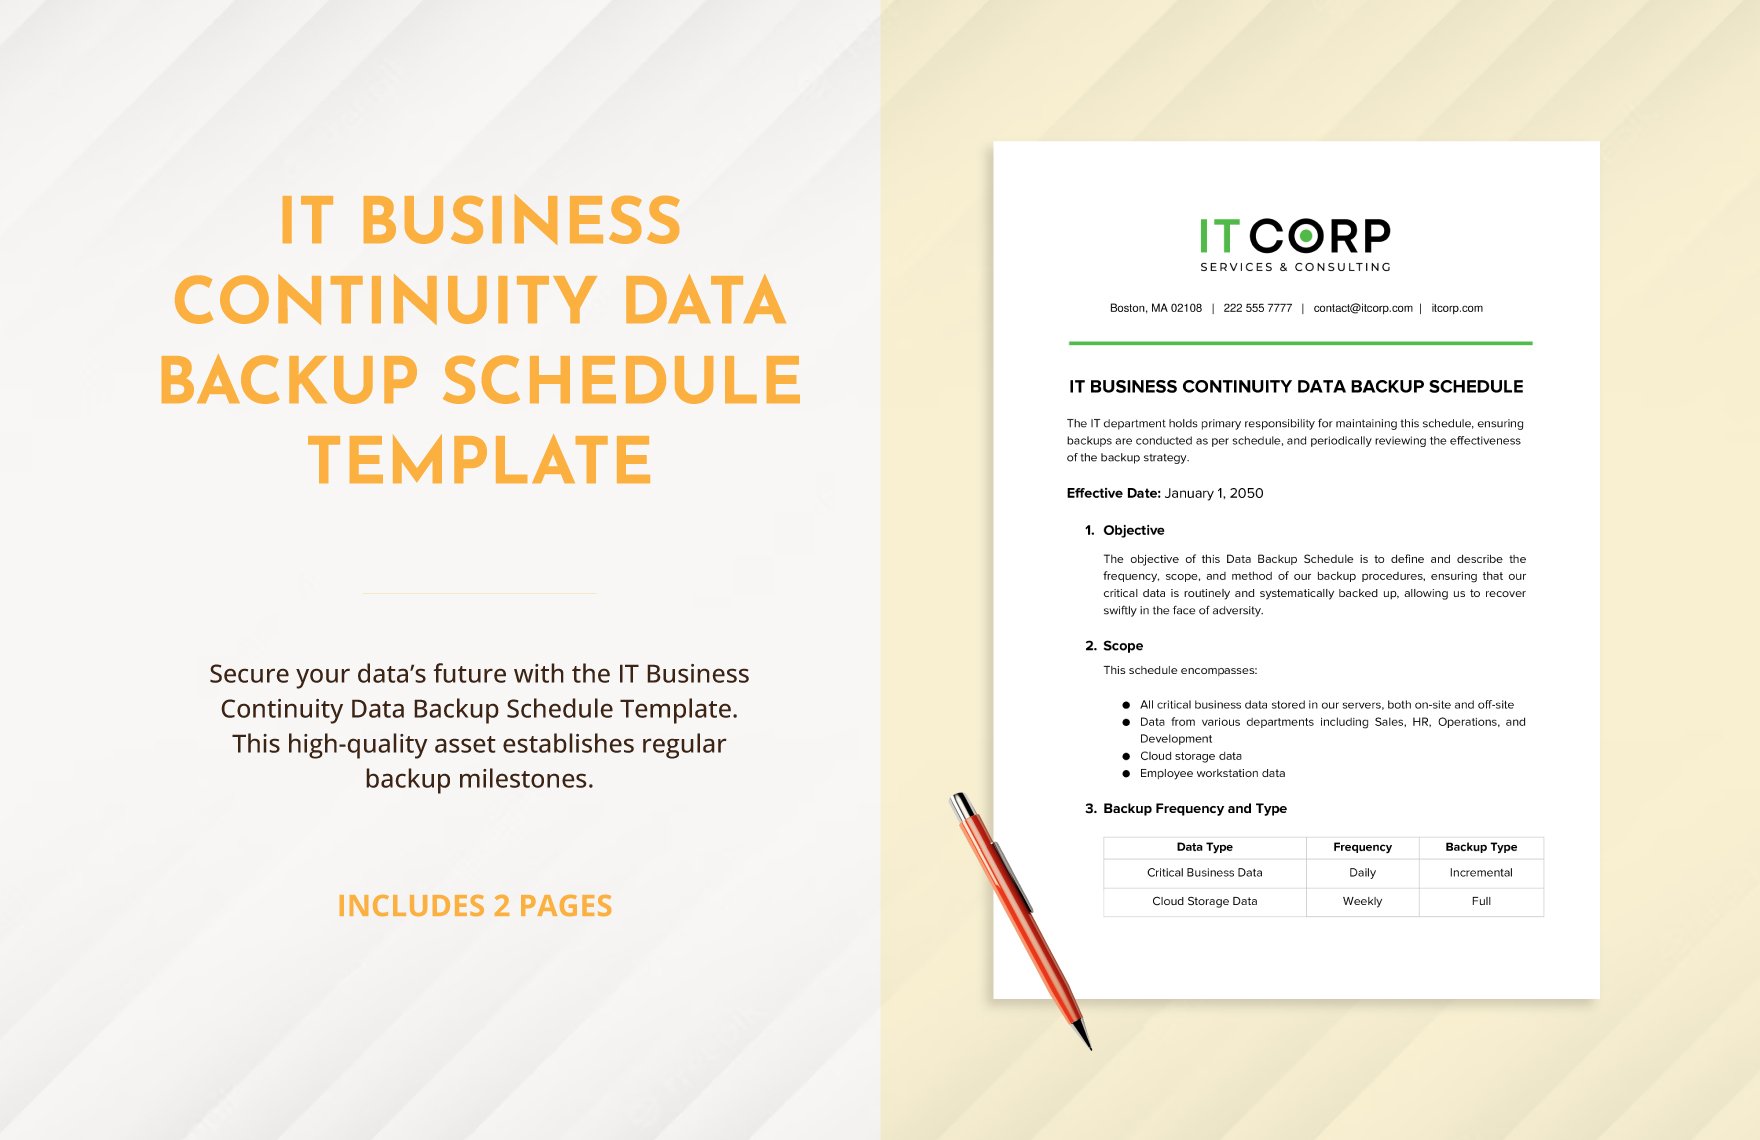 IT Business Continuity Data Backup Schedule Template